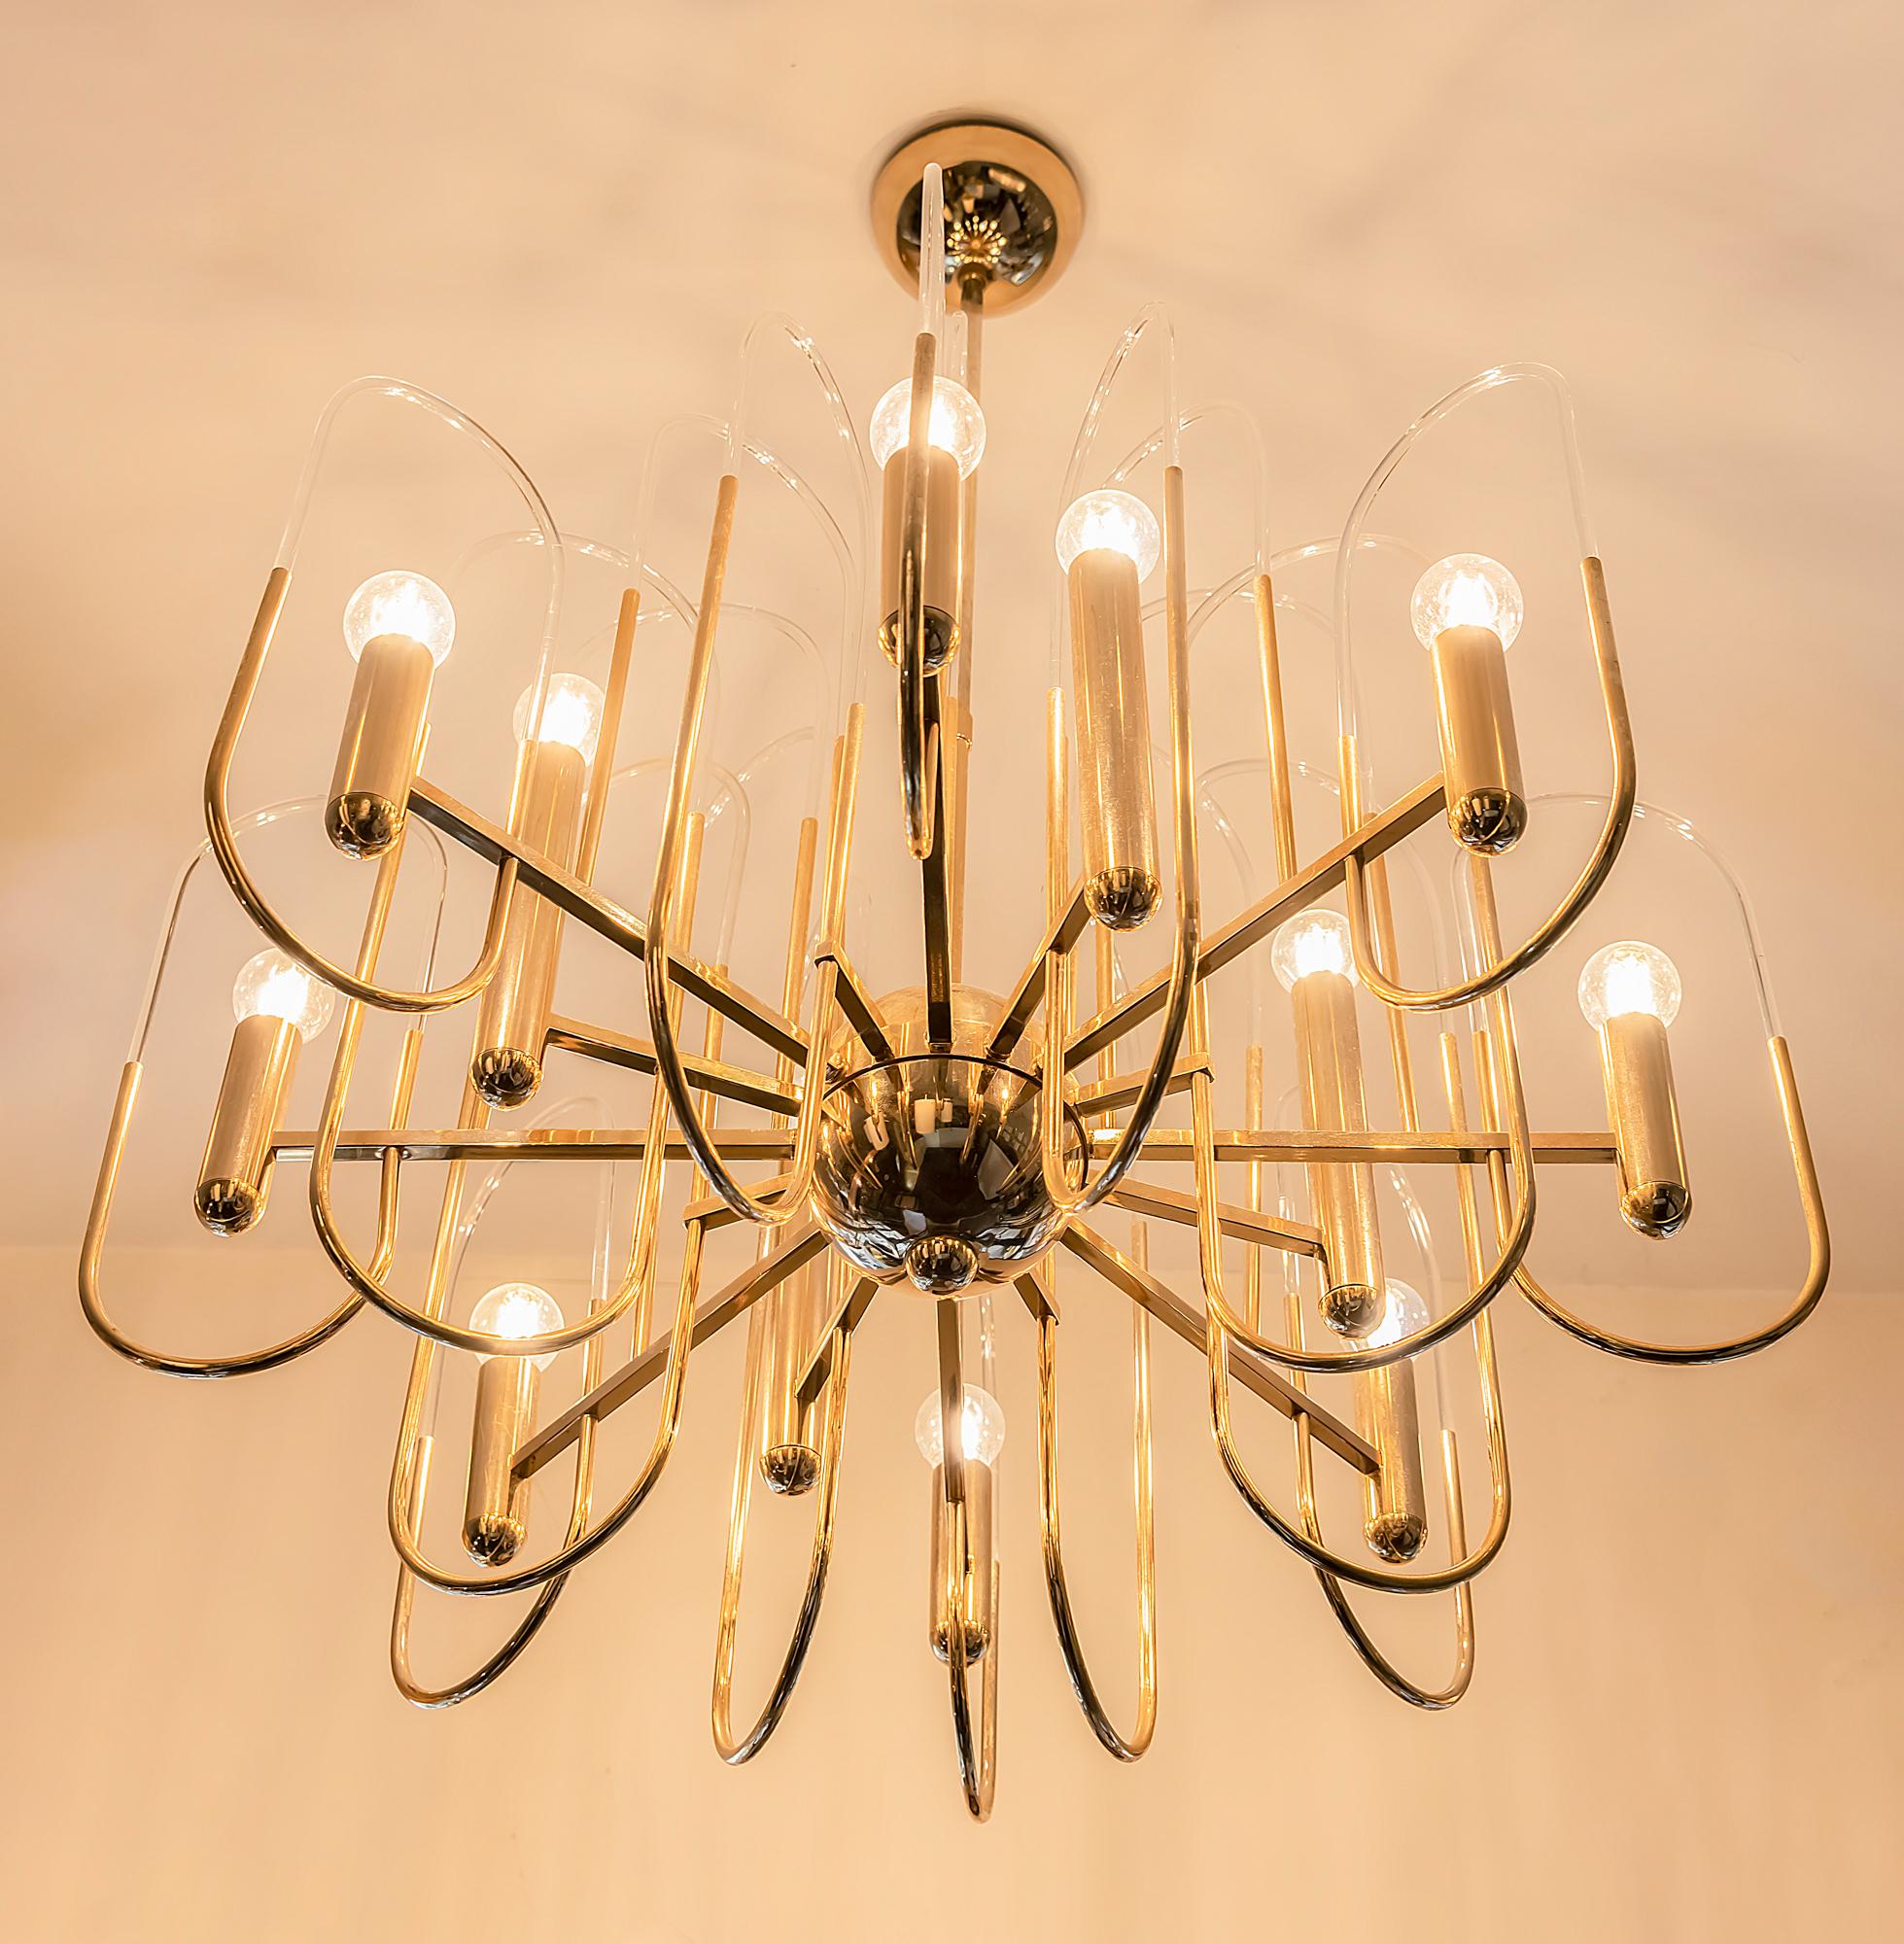 Italian midcentury chandelier. It is made of polished brass and clear glass in the holders.
This chandelier includes 12 pieces. E14 bulbs.
Its is in a very good original vintage condition.
  
 